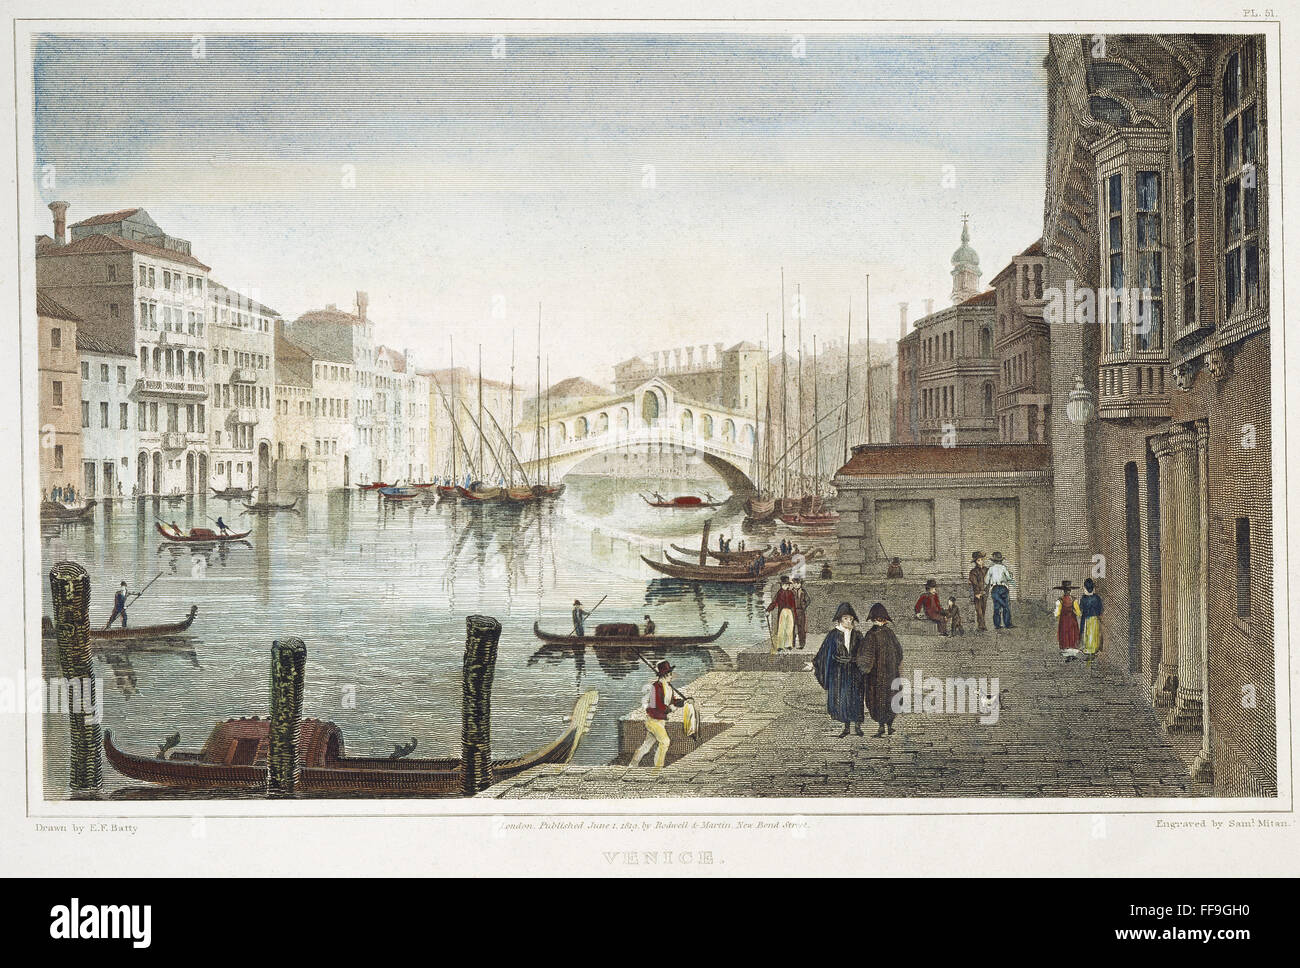 VENICE, 1819. /nA view of Venice, Italy. Steel engraving, English, 1819, after a drawing by Elizabeth Batty. Stock Photo